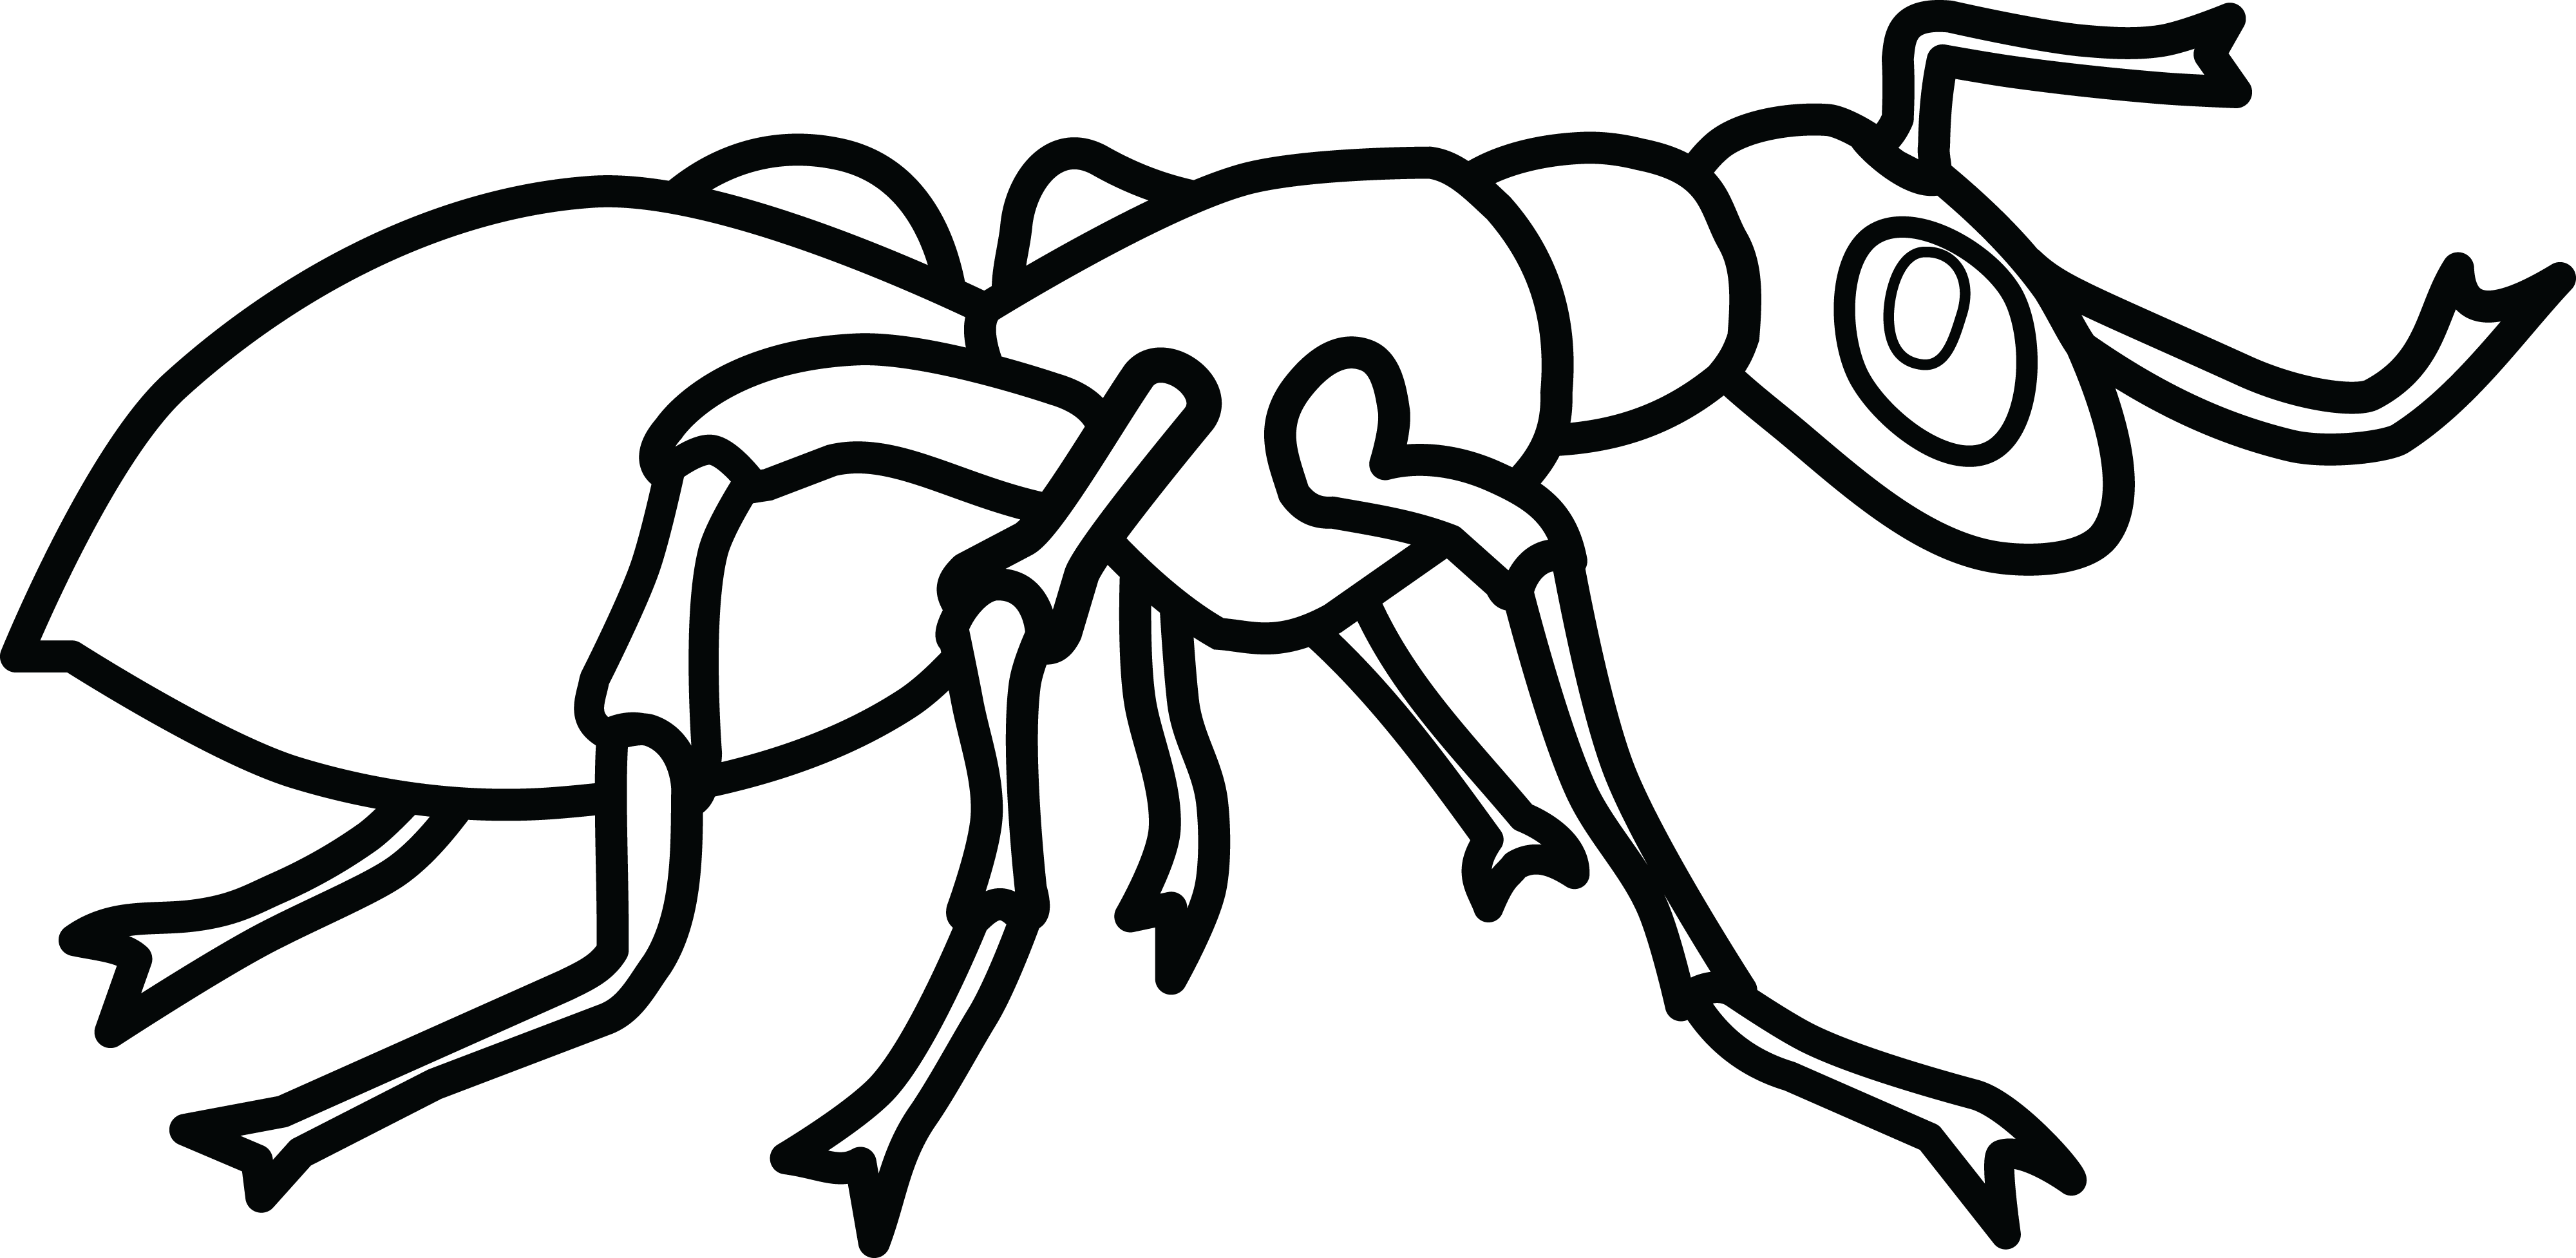 Ant clipart black and white.  collection of high